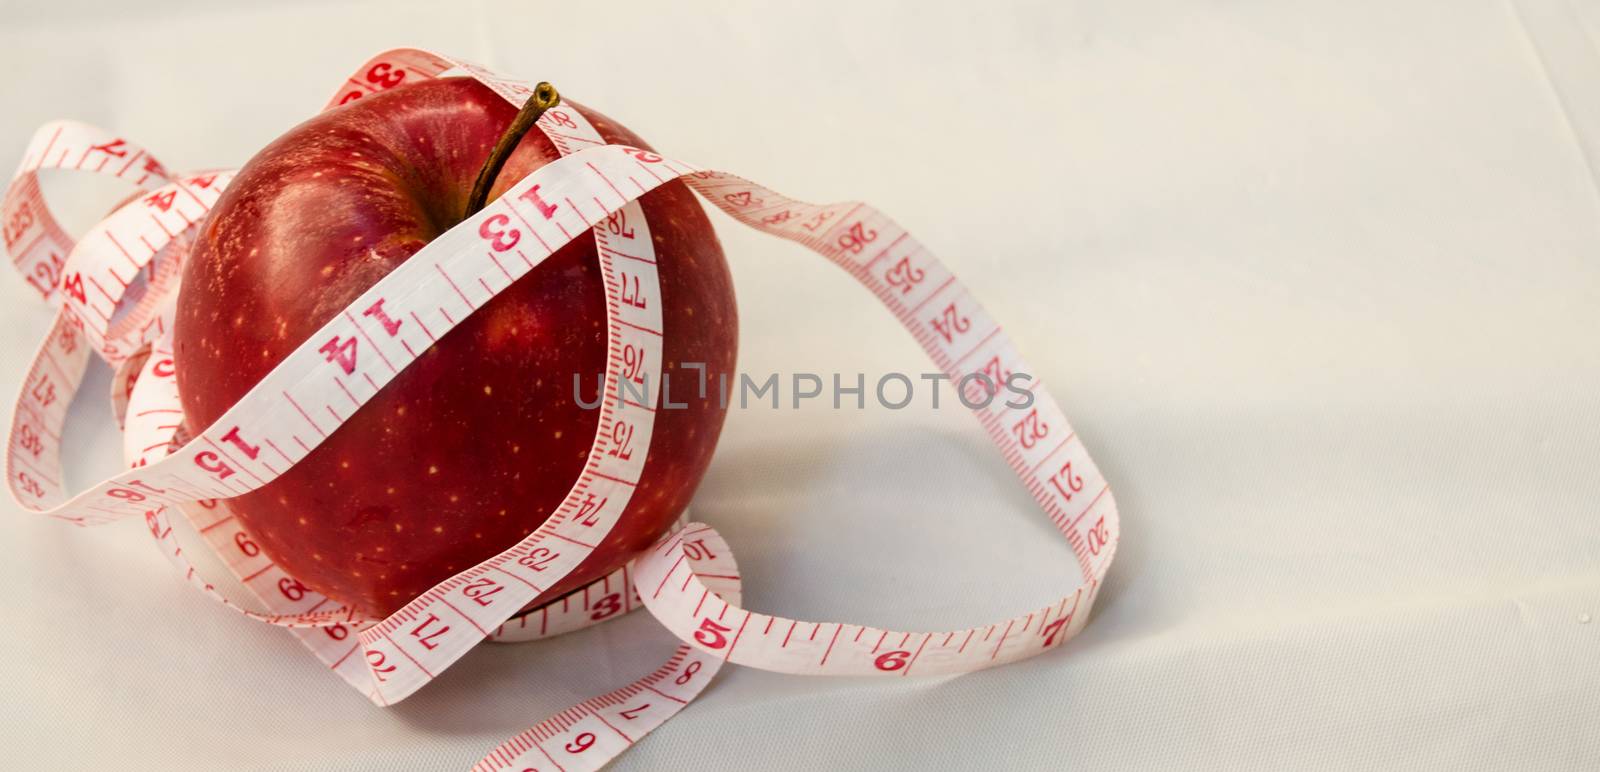 red apple with measurig tape, weigh loss concept by negmardesign